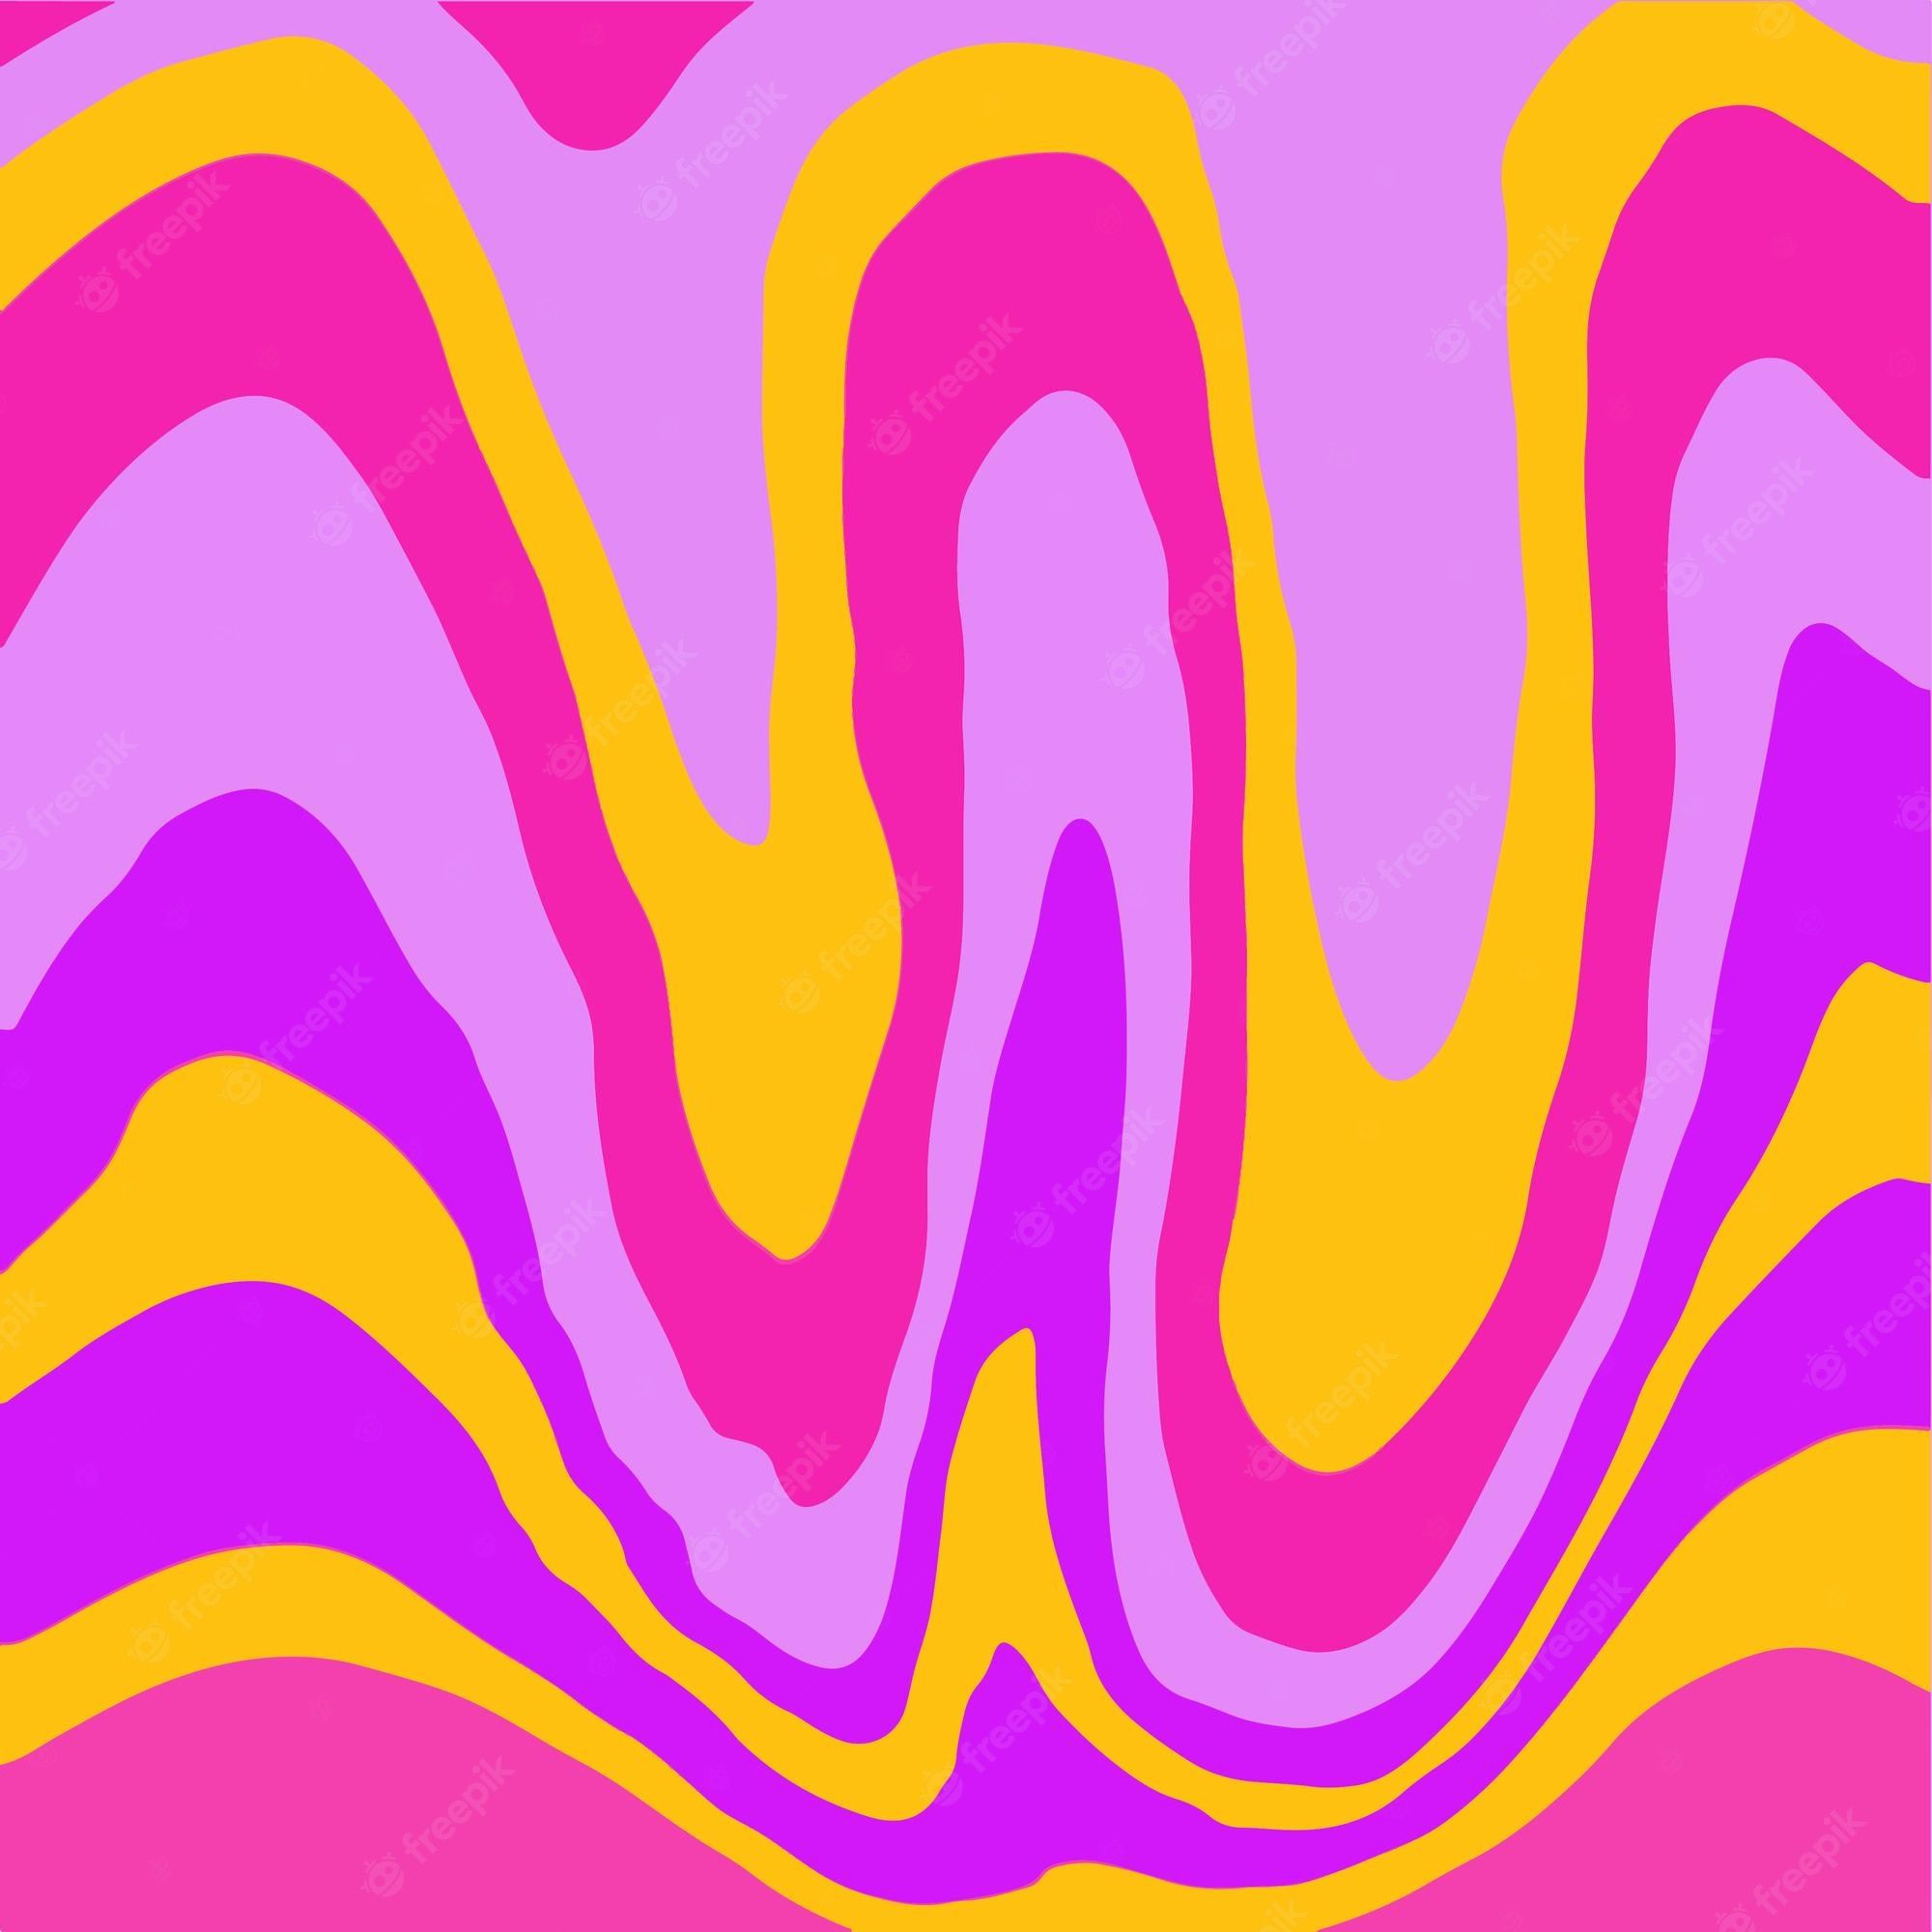 A colorful wave pattern on pink and purple background - Y2K, 2000s